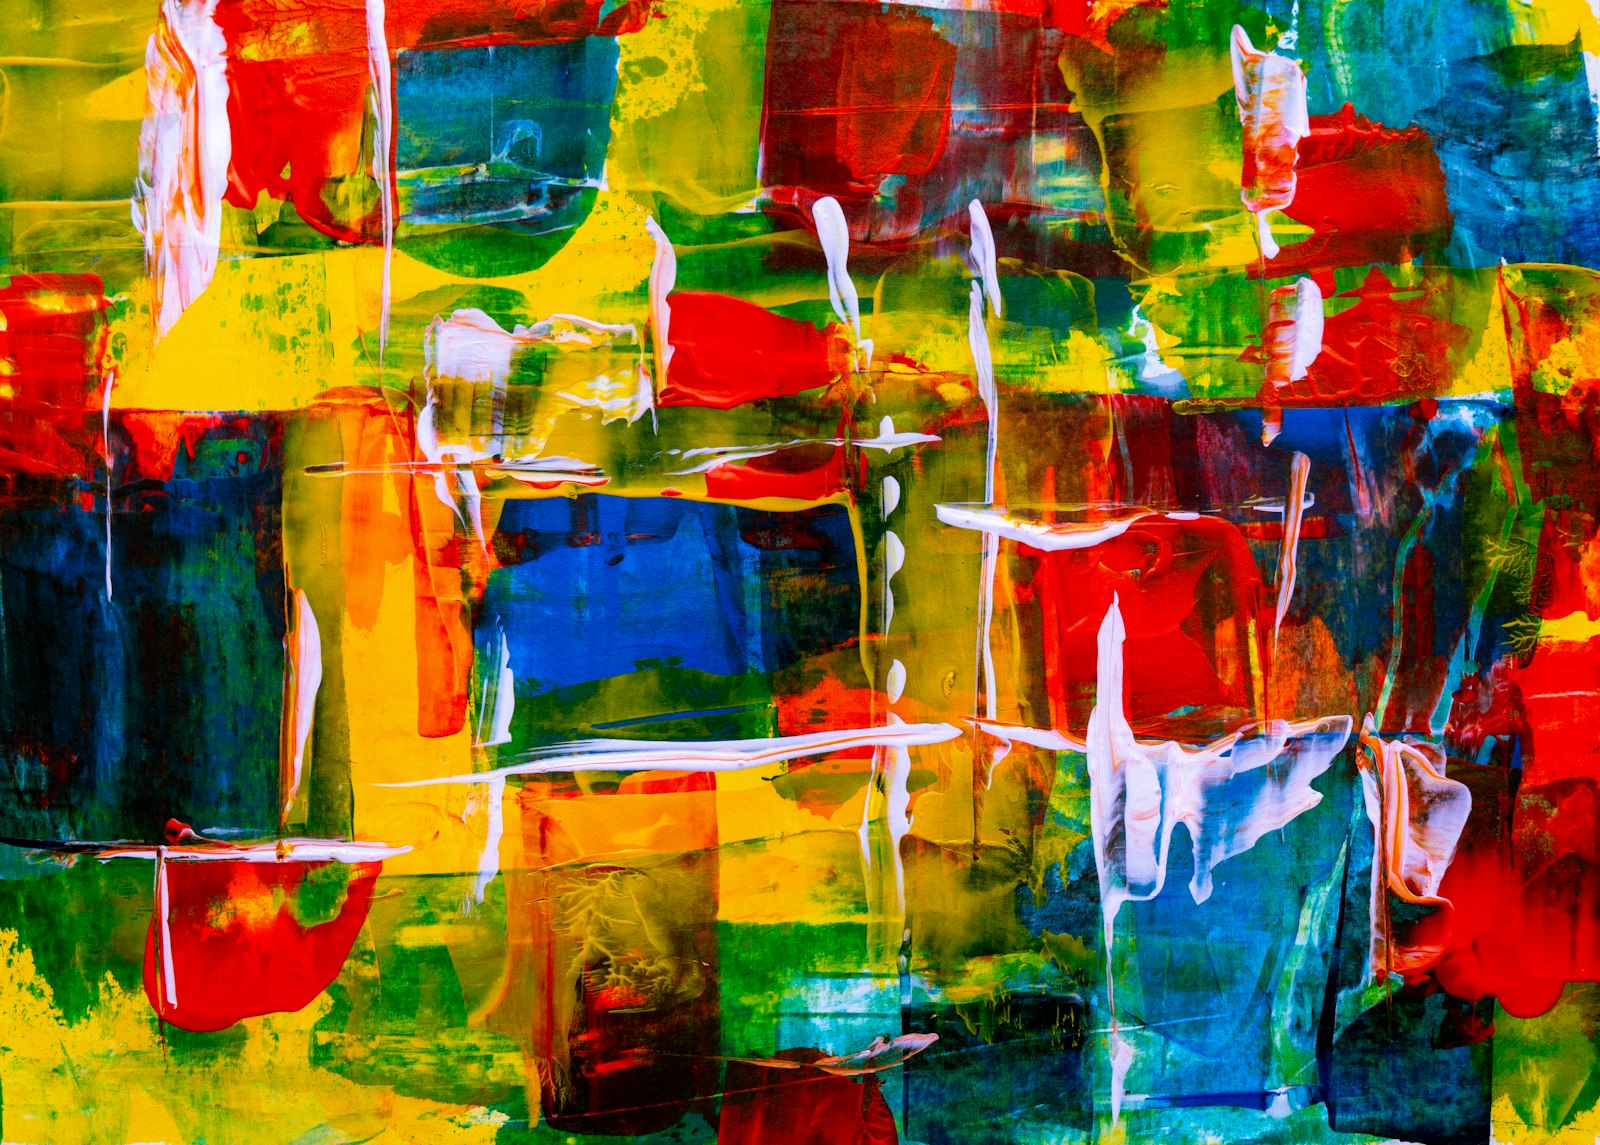 Samsung NX1000 sample photo. Multicolored abstract painting photography